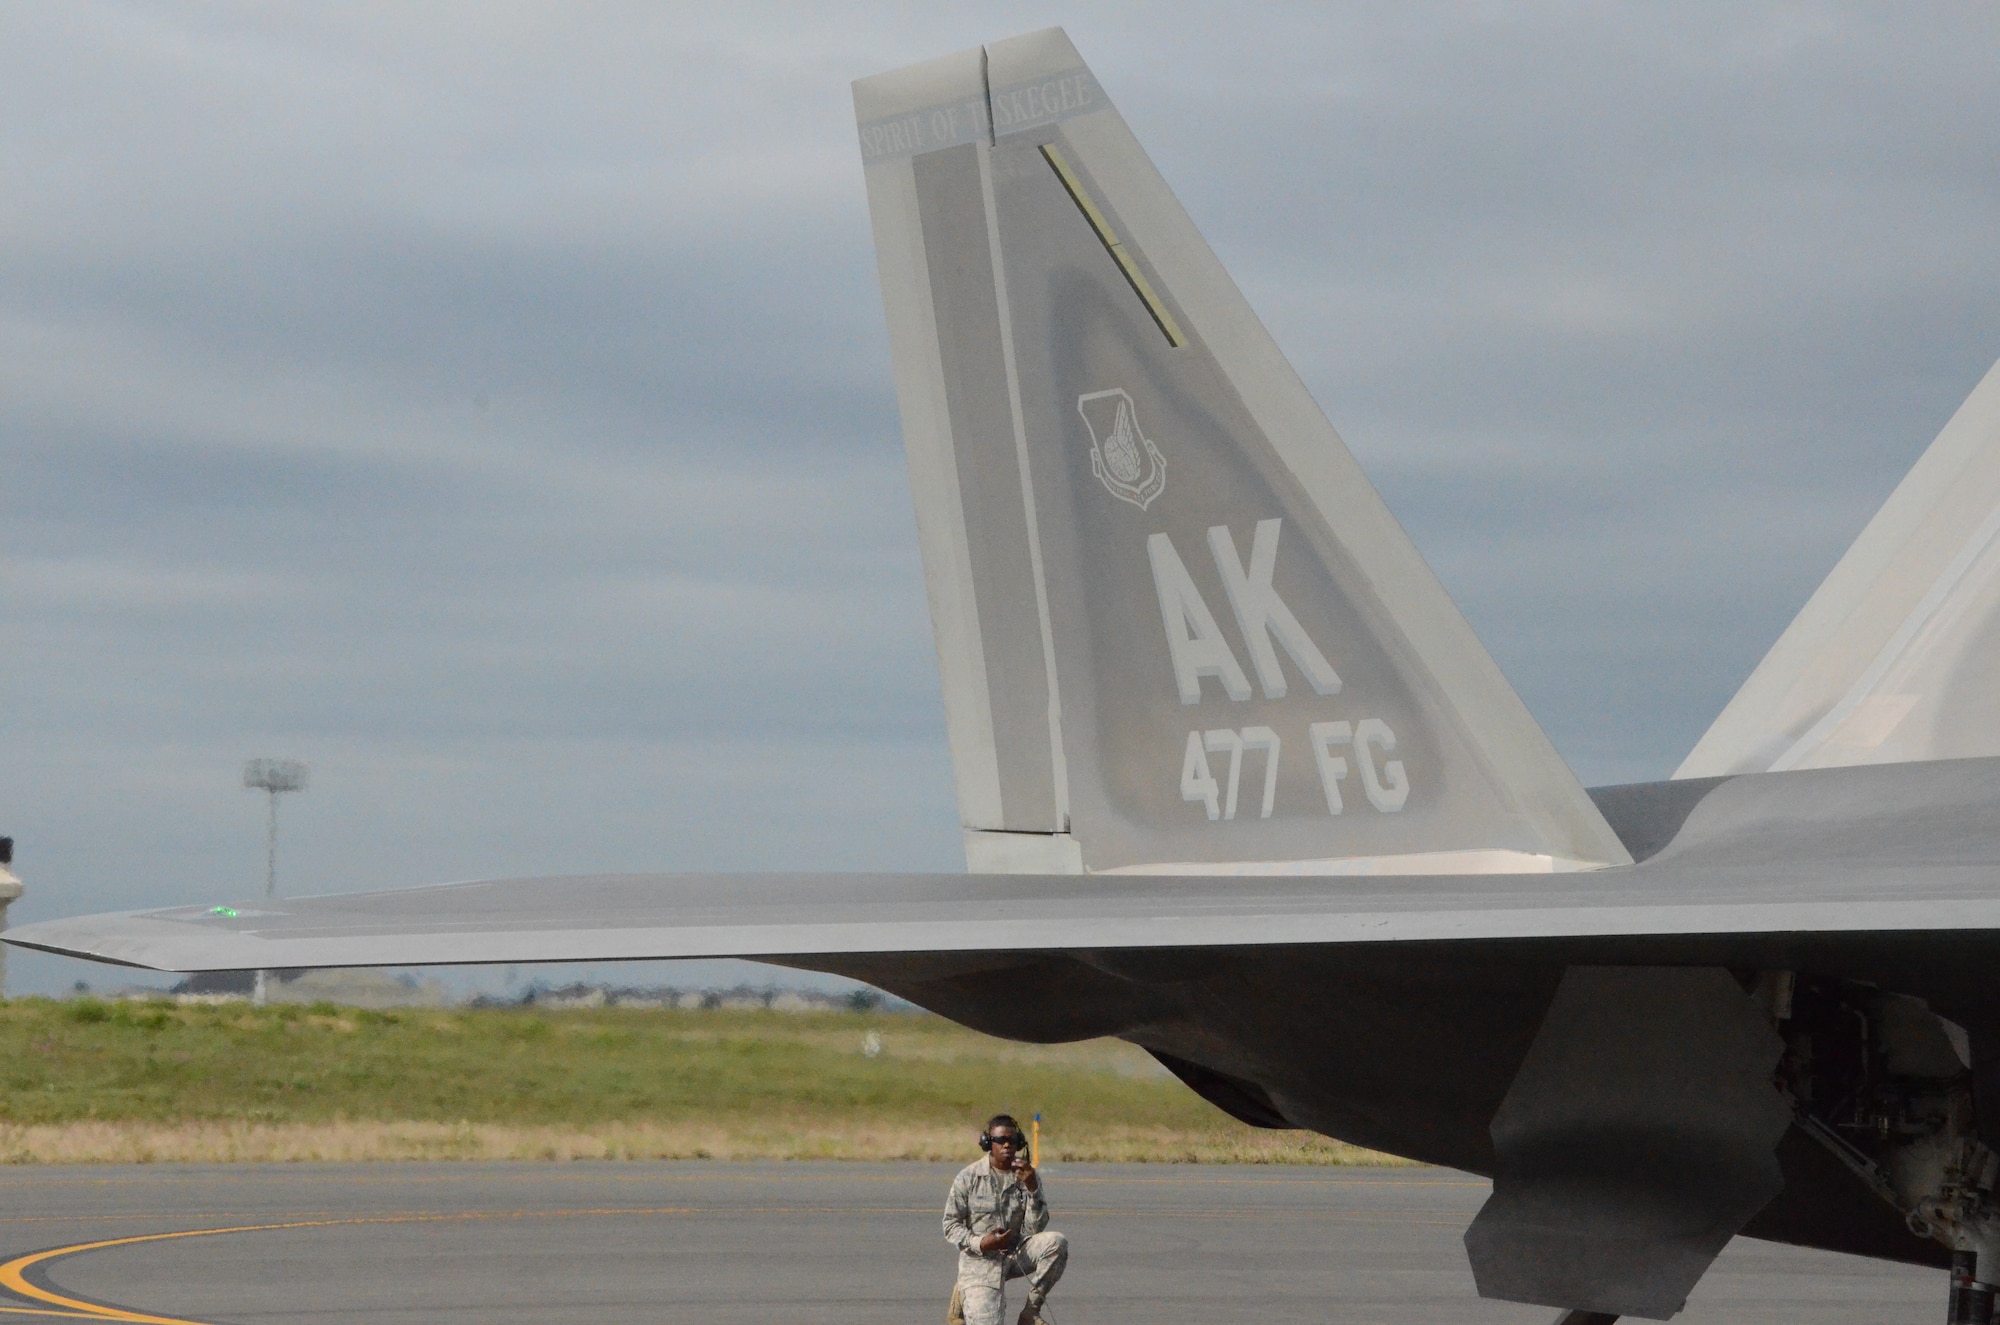 Airman 1st Class Jermaine James, 477th Aircraft Maintenance Squadron F-22 crew chief, prepares to launch an F-22 here July 31. This was the first time tail number 147 has flown after being transformed into the 477th Fighter Group flagship.  The words “Spirit of Tuskegee” painted across the tail, a nod to the units Tuskegee Airmen heritage.  The Reserve 477th Fighter Group was previously the 477th Bombardment Group, a Tuskegee unit activated in 1944. The group's 302nd Fighter Squadron historically was part of the 332nd Fighter Group, also known as "The Redtails" the famous all-black unit that fought both American prejudice and the axis powers in Europe.  (U.S. Air Force/ Tech. Sgt. Andy Eichorst)